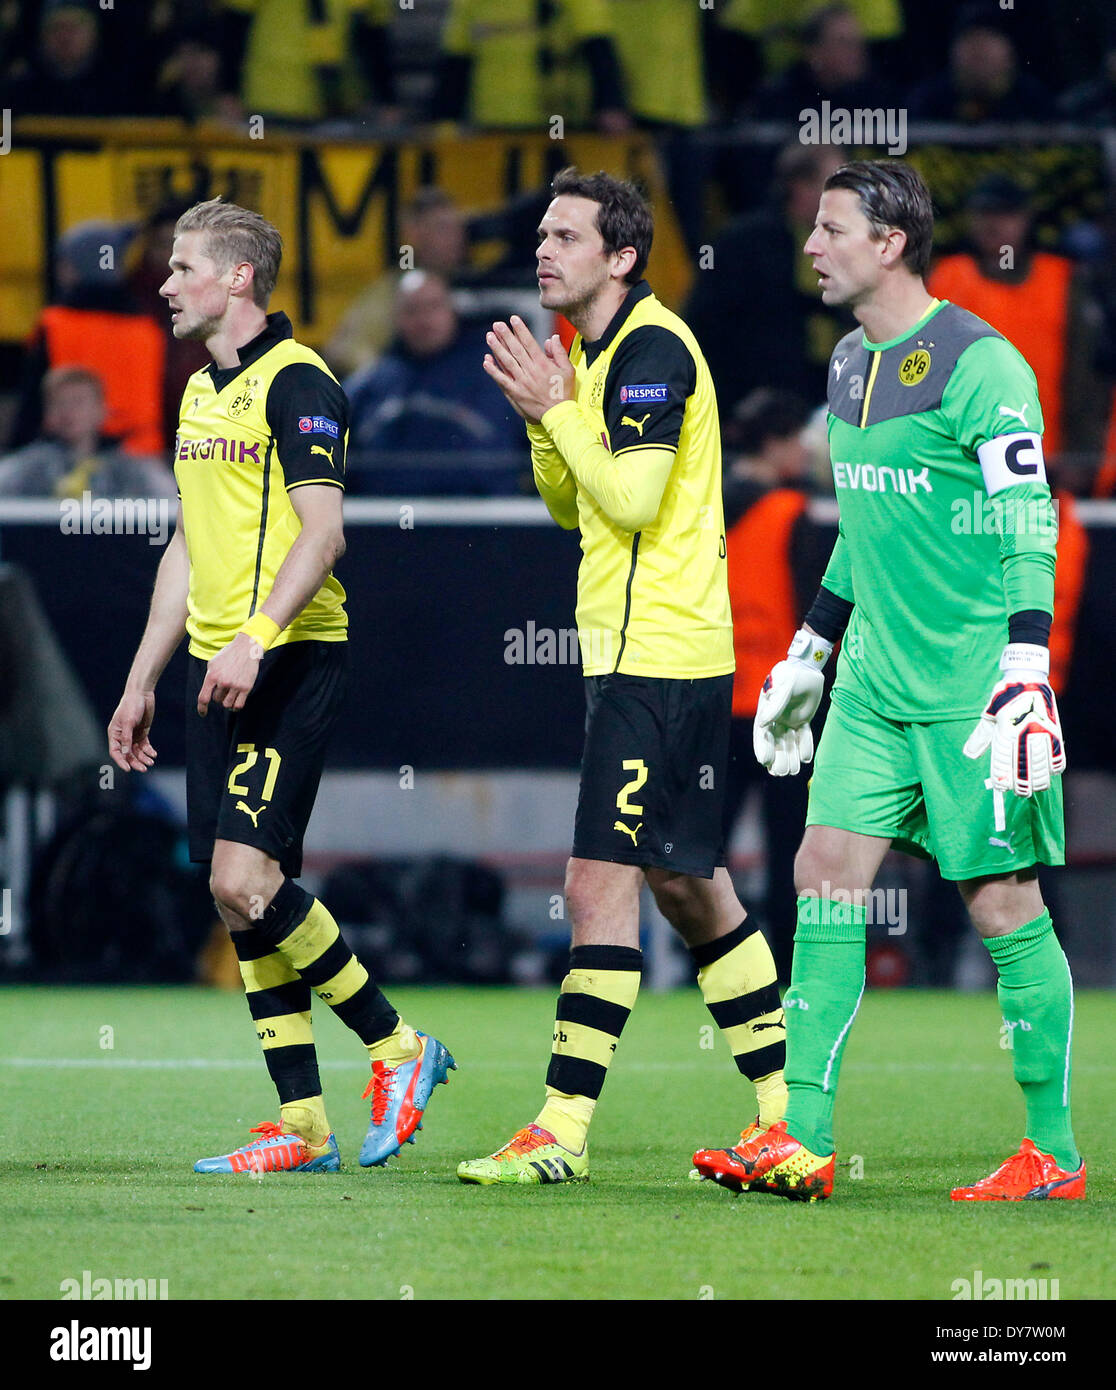 Dortmunds Manuel Friedrich (M) and Roman Weidenfeller (R) disappointed during the UEFA Champions League quarter final match between Borussia Dortmund and Real Madrid, Signal Iduna Park in Dortmund on April 08, 2014. Stock Photo